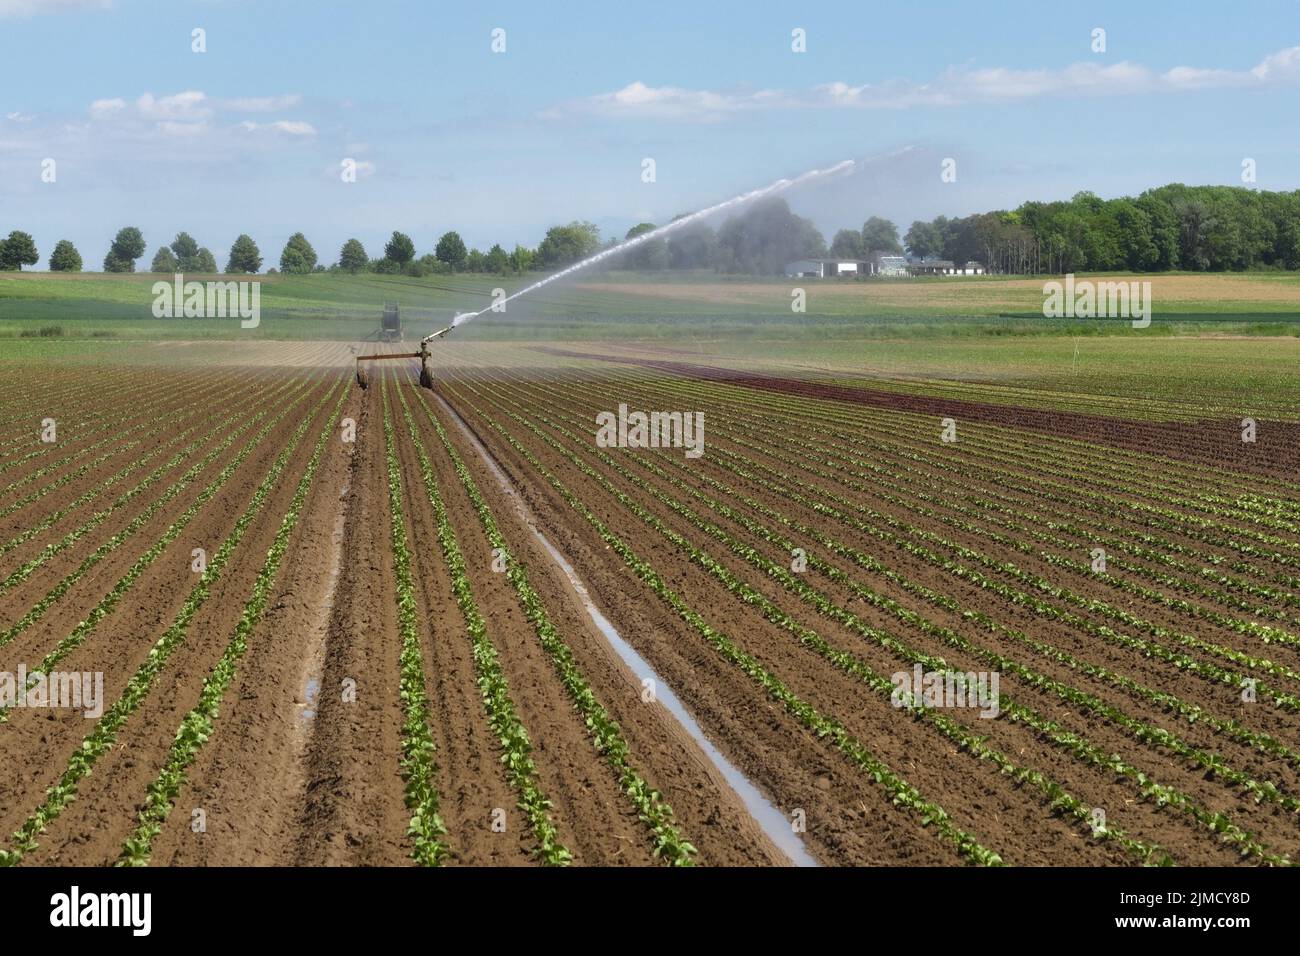 Irrigation of a vegetable field, Germany Stock Photo